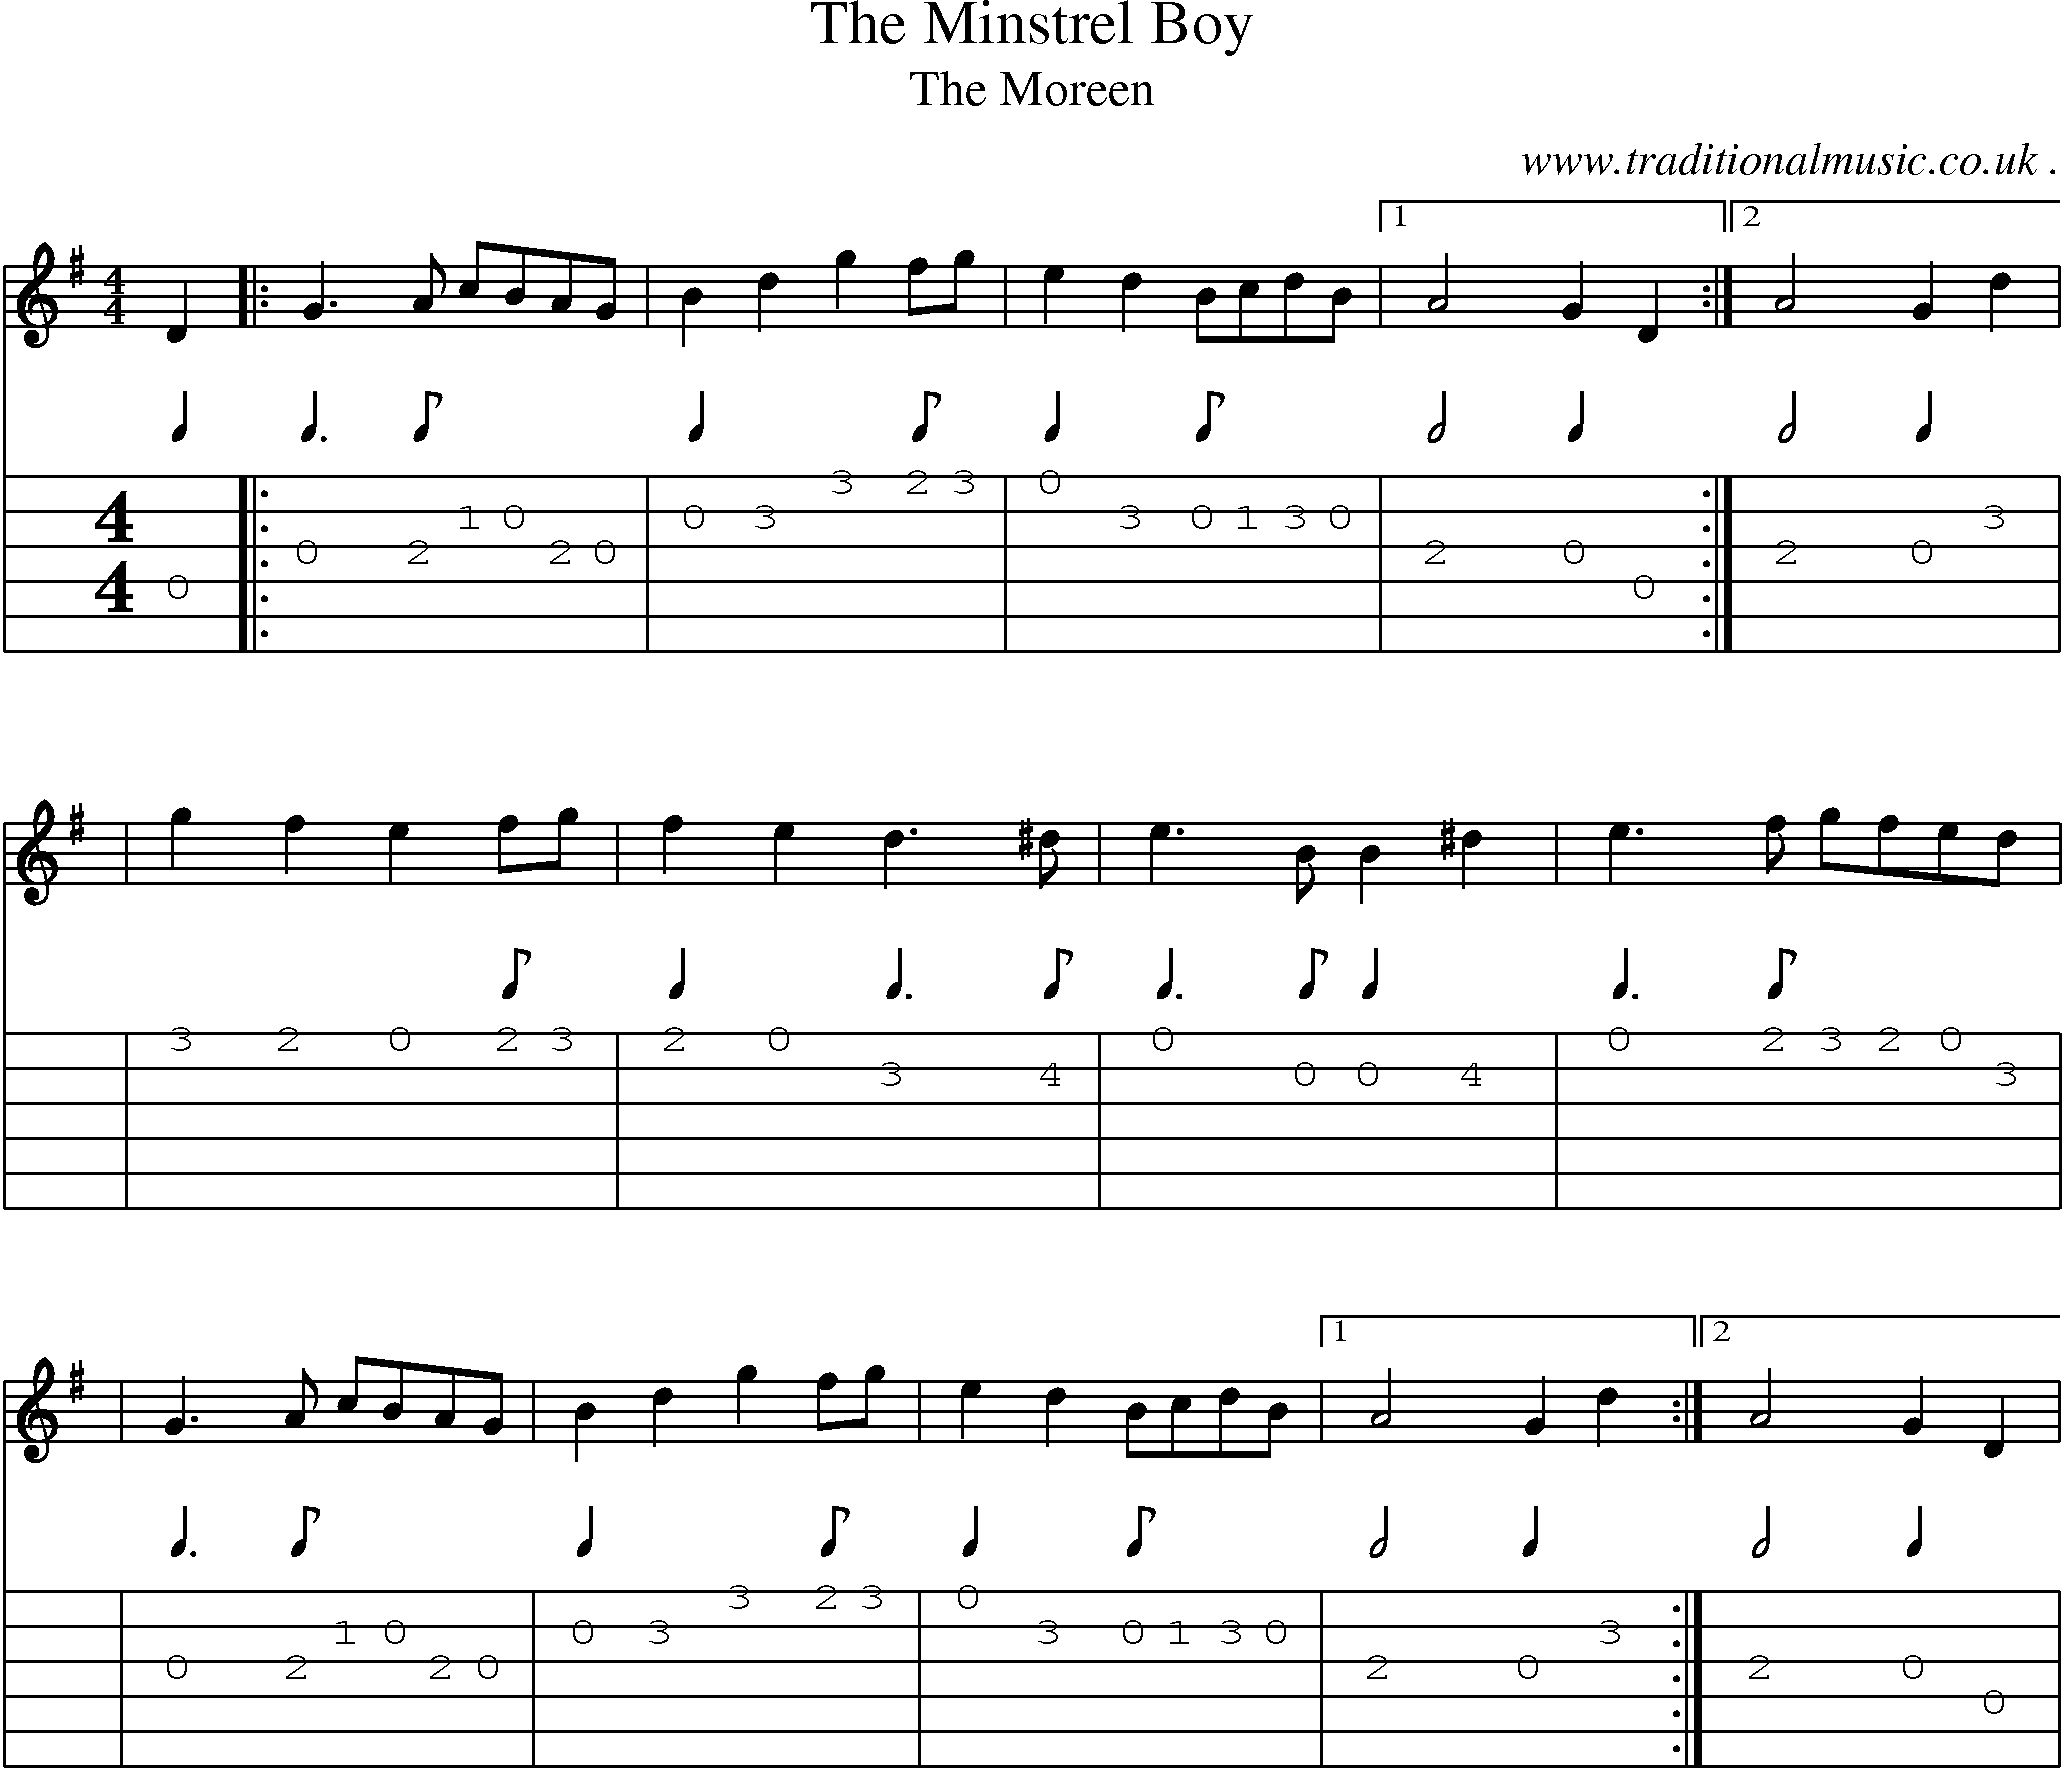 Sheet-Music and Guitar Tabs for The Minstrel Boy